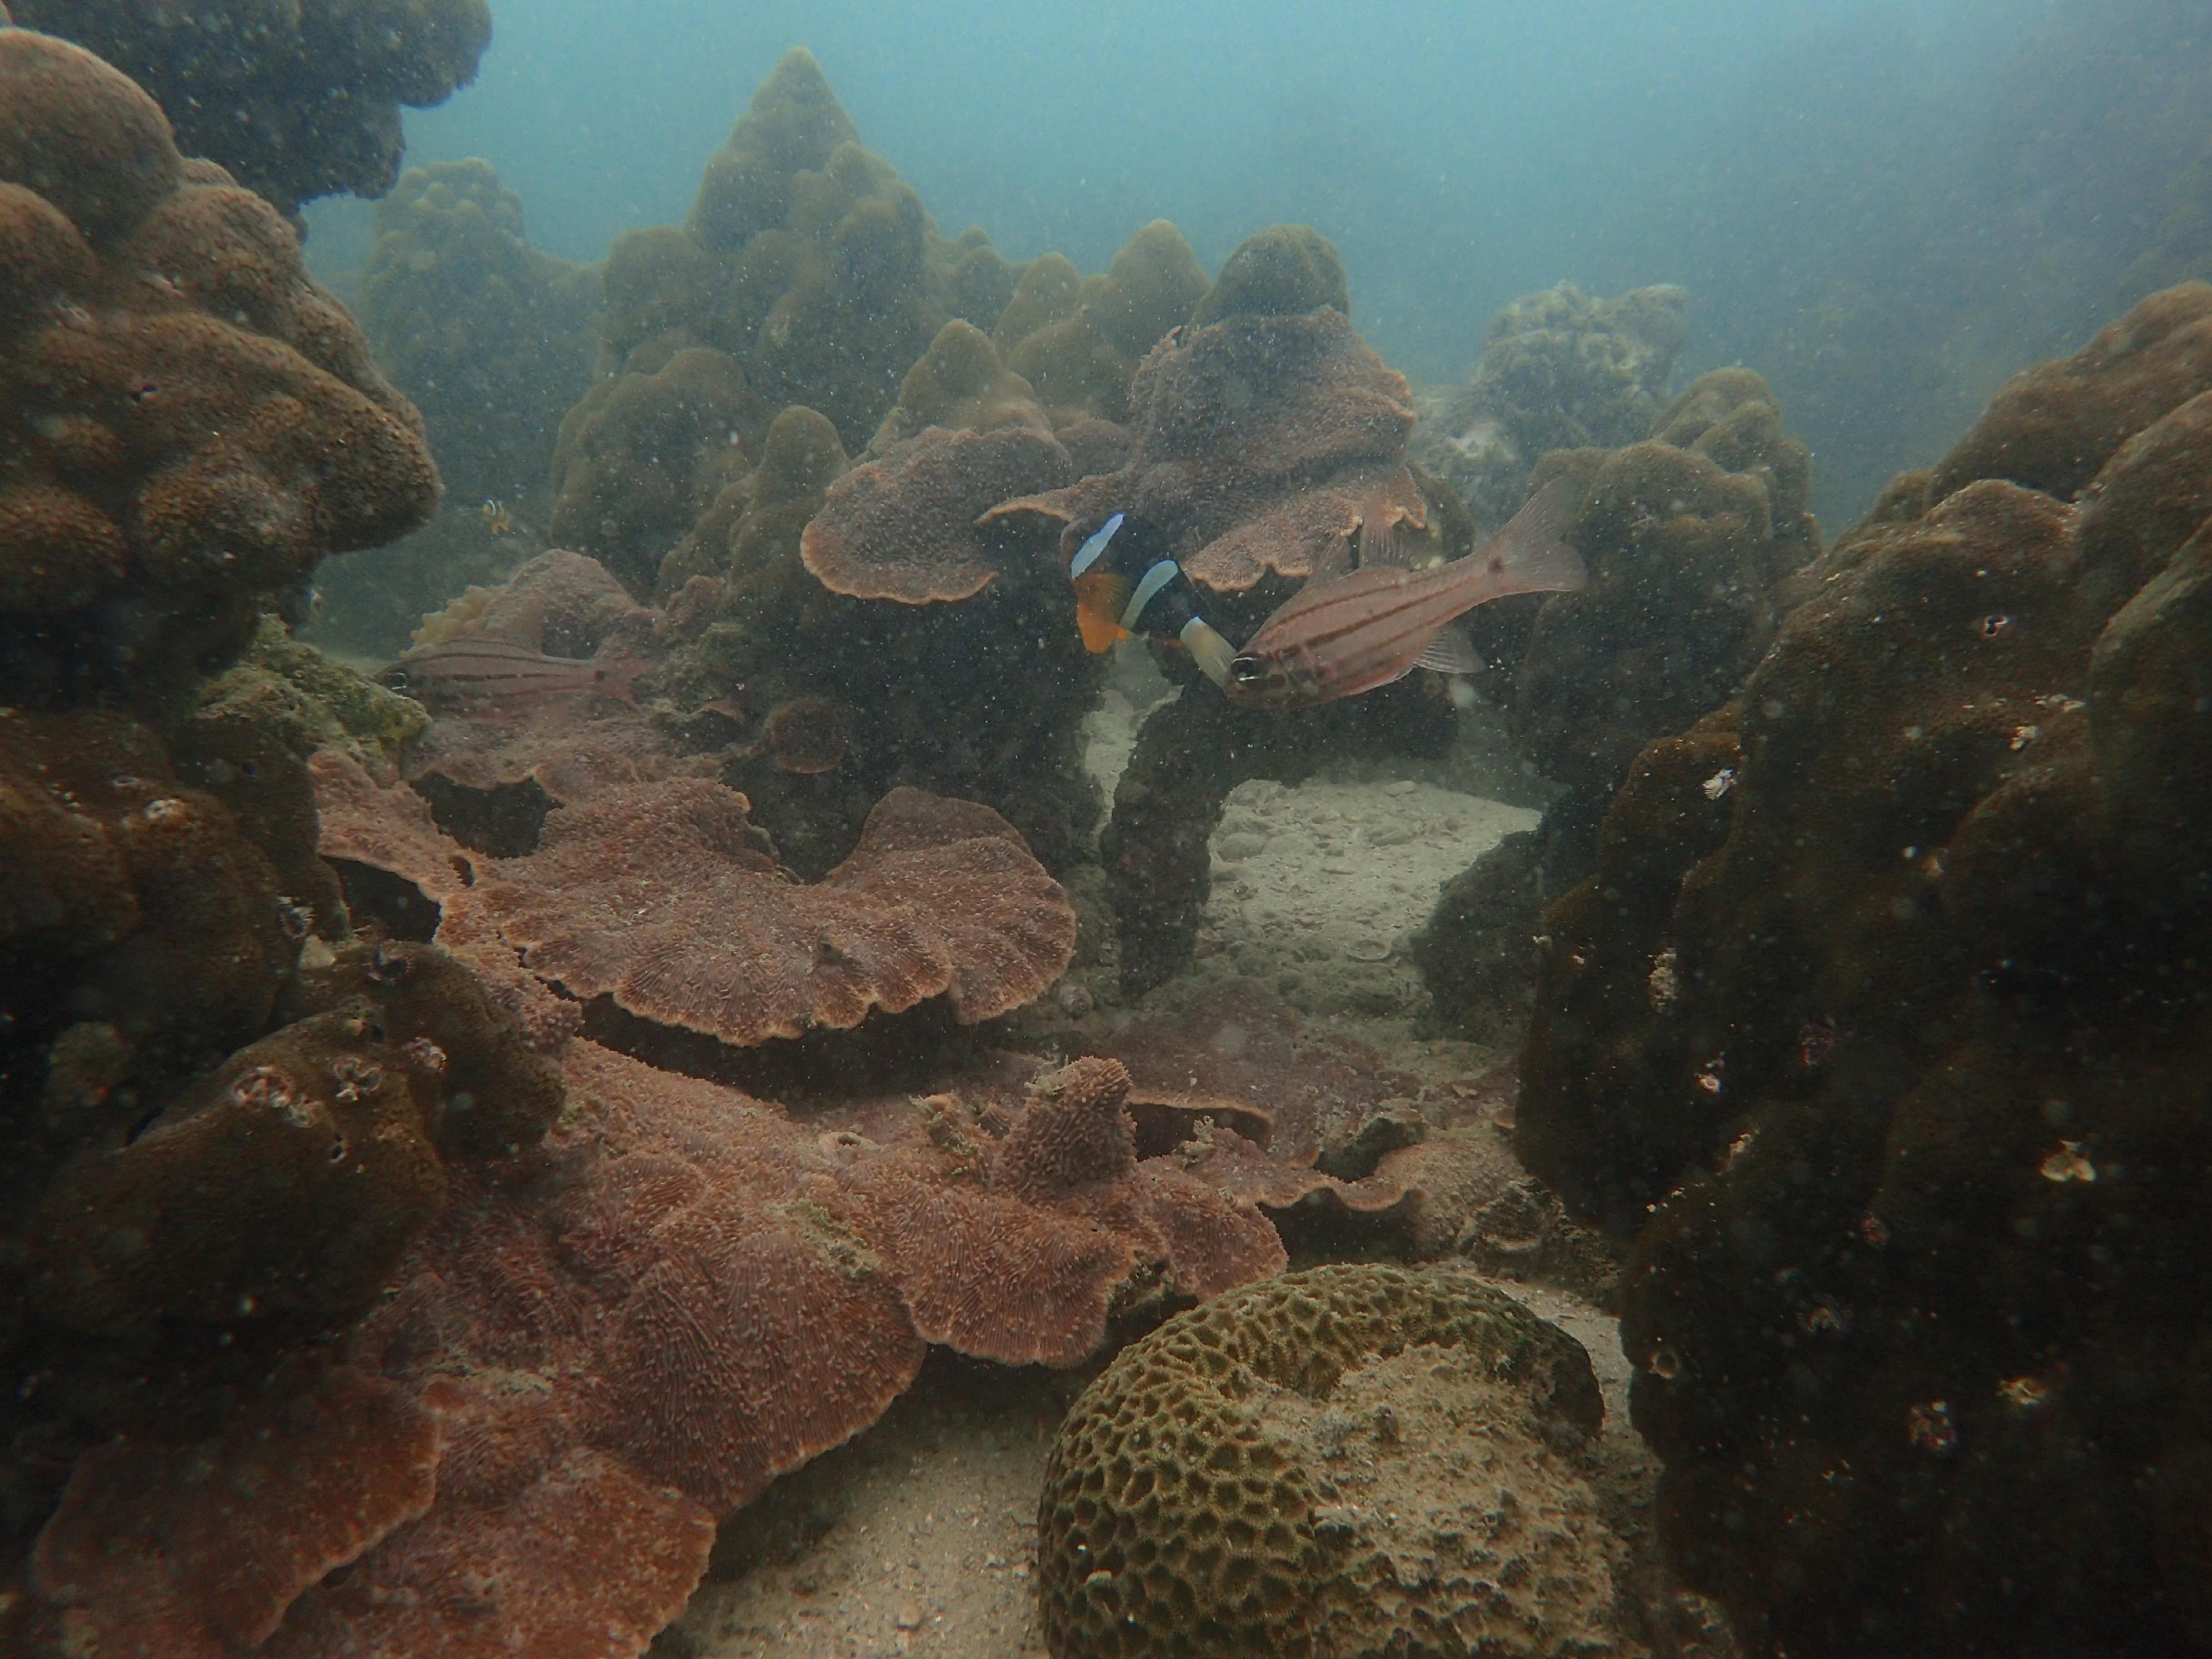 The Agriculture, Fisheries and Conservation Department announced today (December 11) that the Reef Check this year showed that local corals are generally in a healthy and stable condition and that the species diversity remains on the high side. Photo shows corals and reef fishes at Crescent Island West.